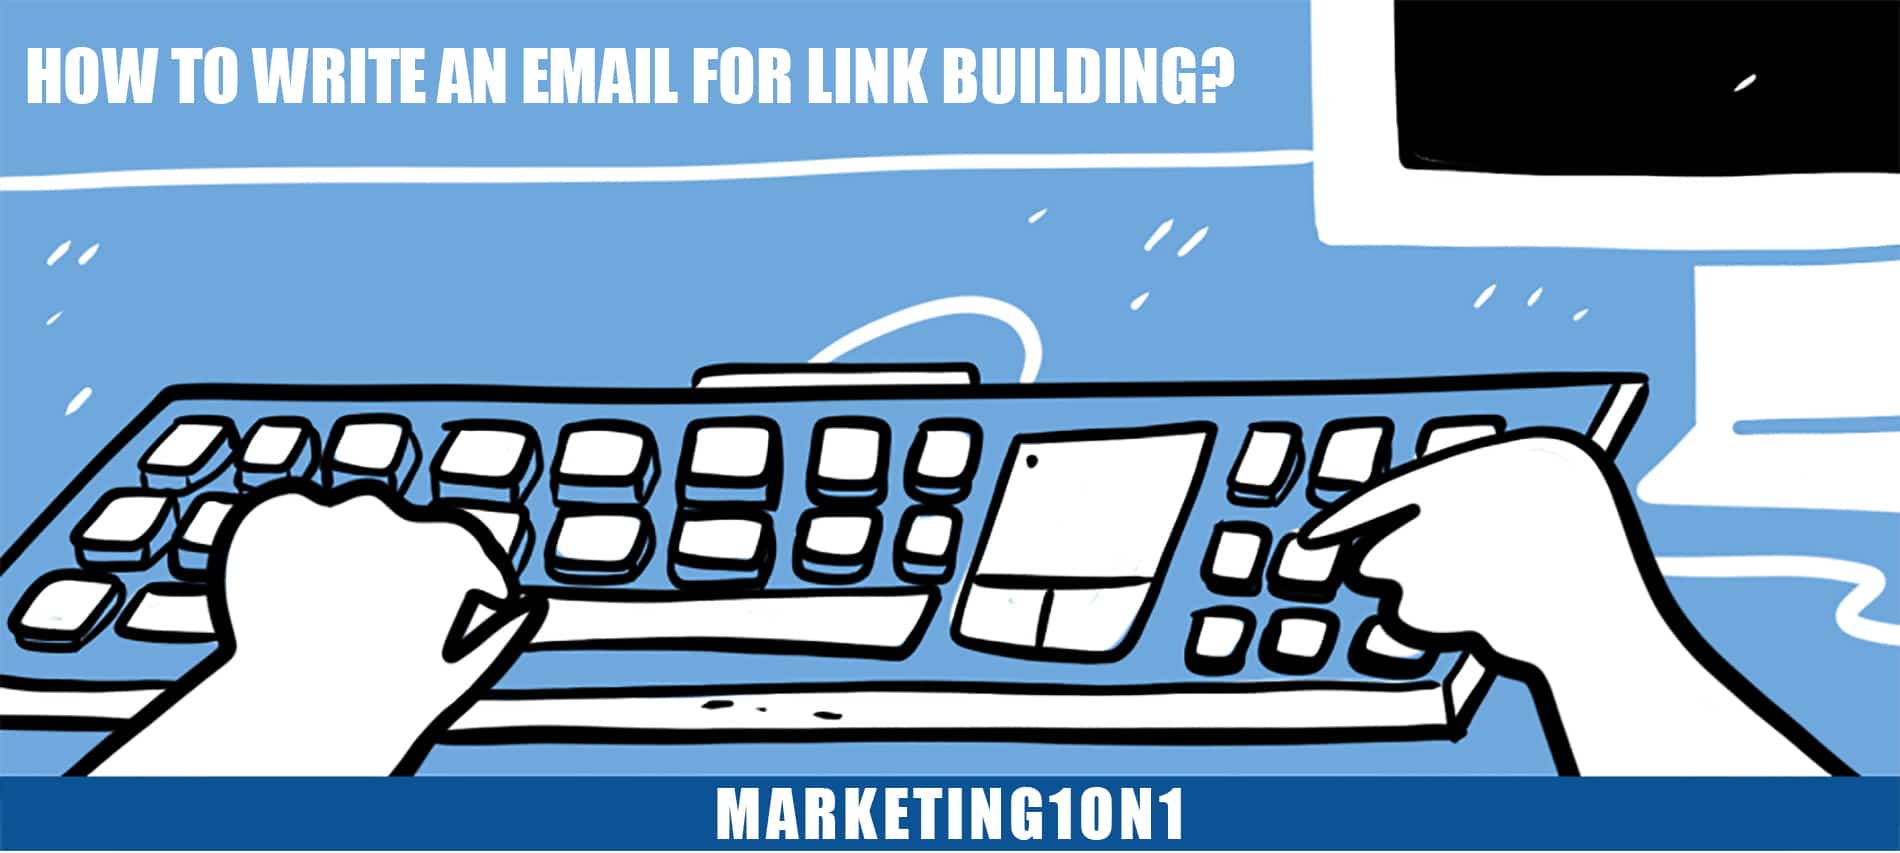 How to write an email for link building?